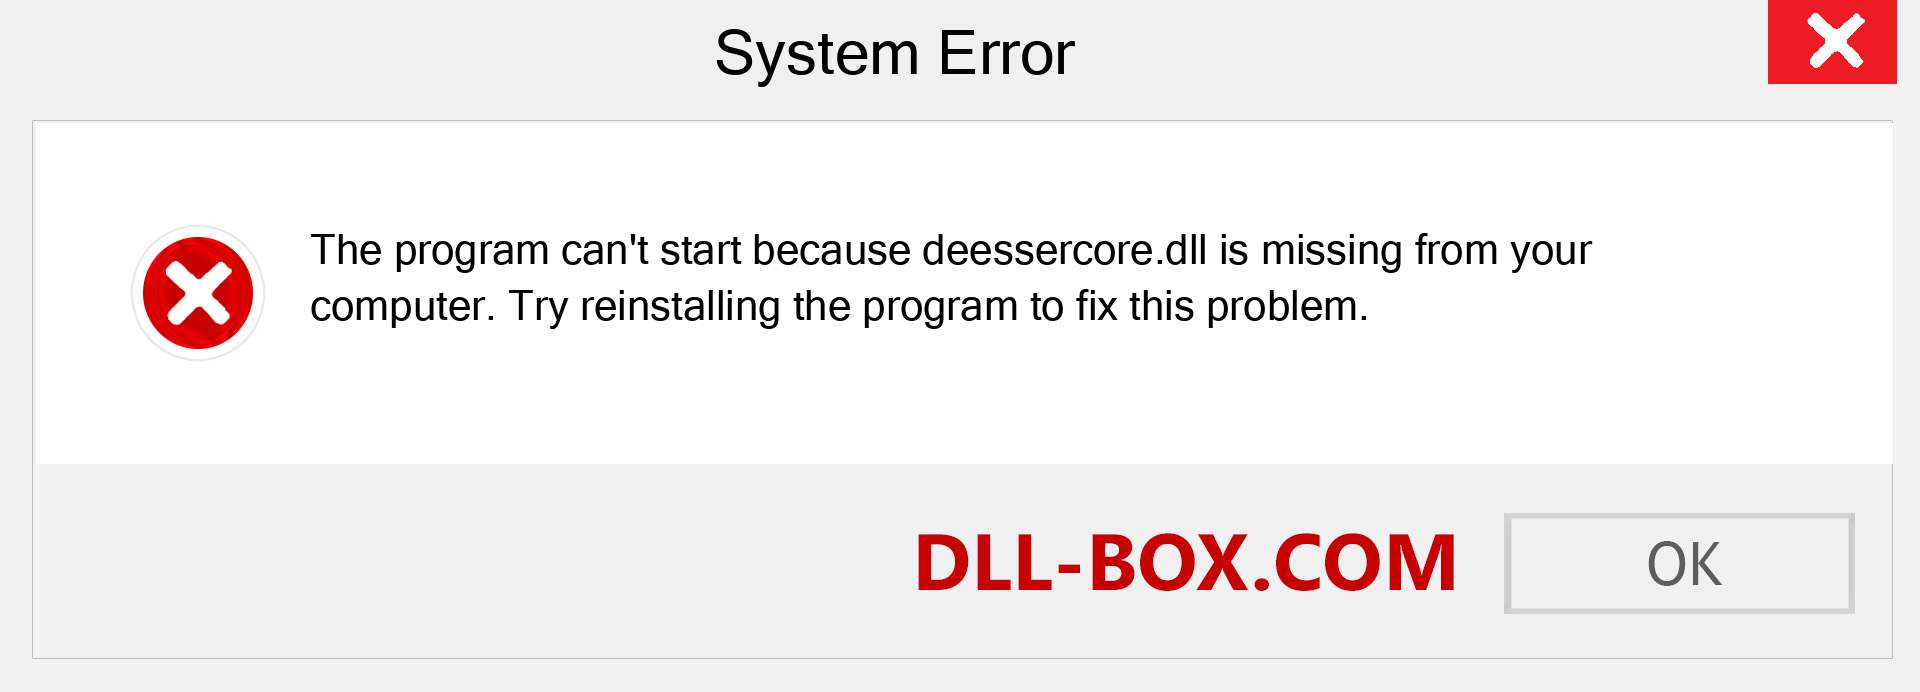  deessercore.dll file is missing?. Download for Windows 7, 8, 10 - Fix  deessercore dll Missing Error on Windows, photos, images